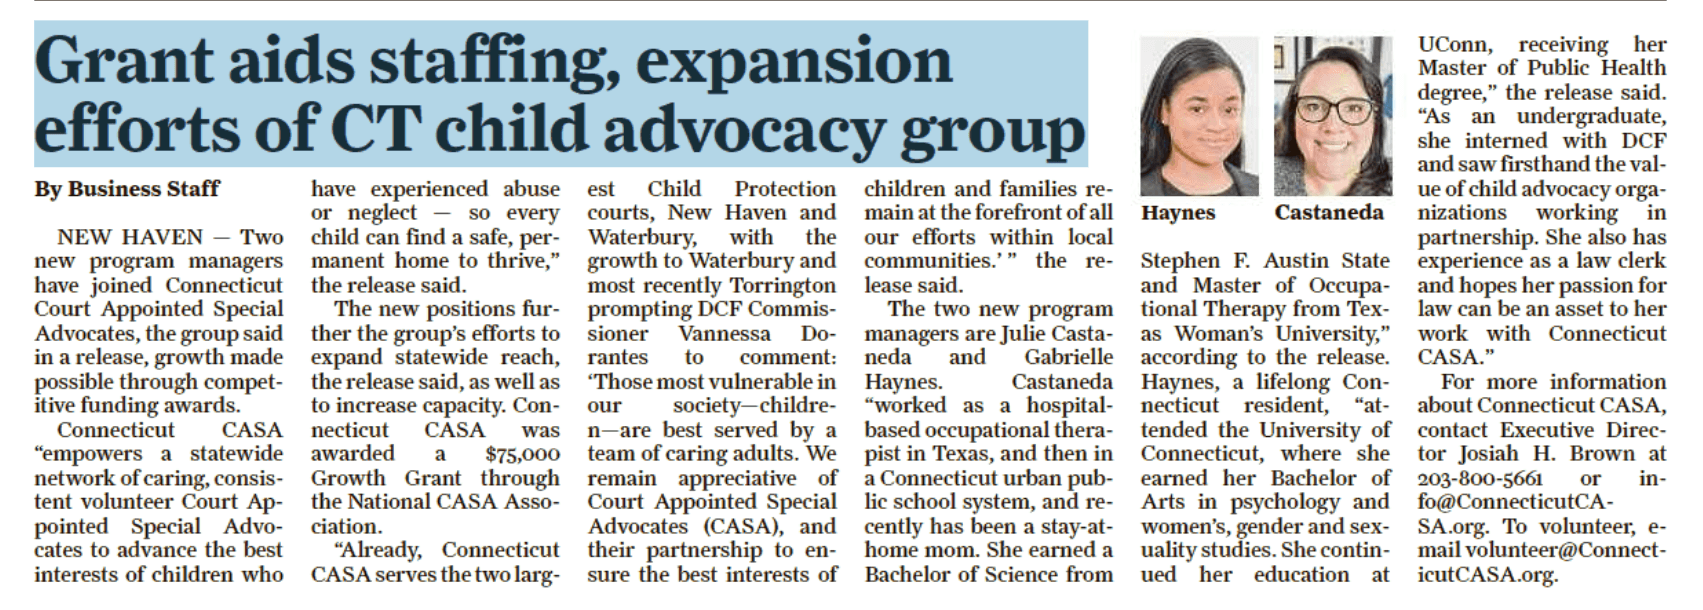 "Grant aids staff growth, expansion efforts of CT child advocacy group"